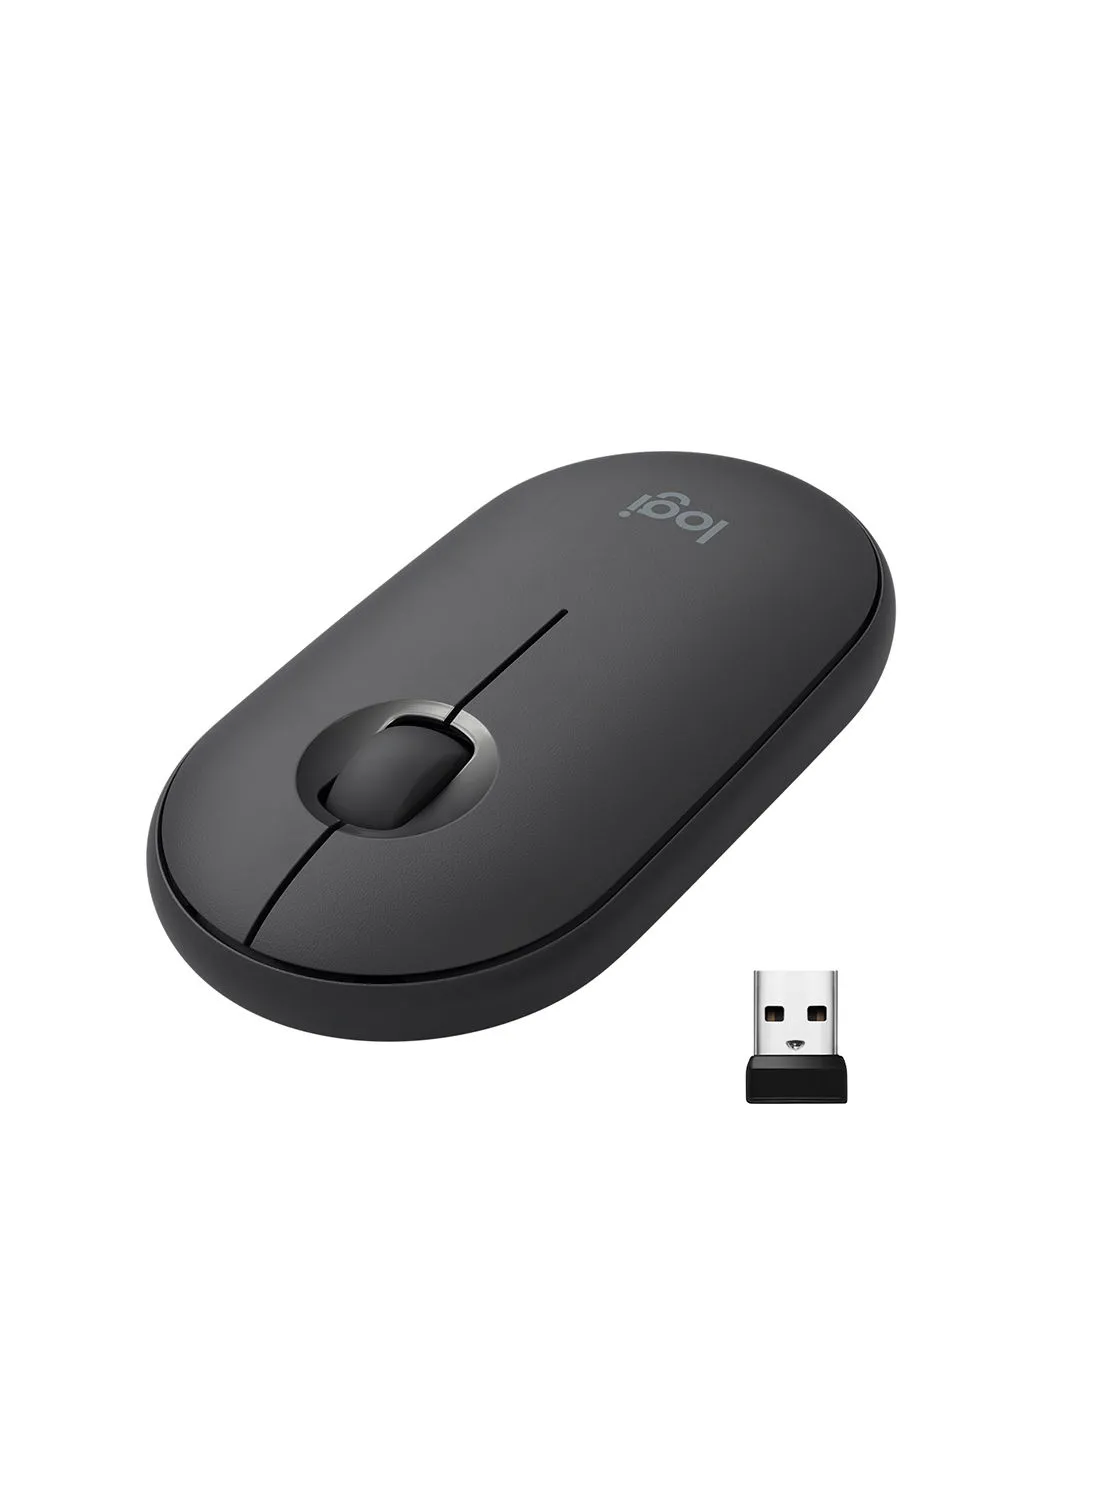 Logitech M350 Pebble Wireless Mouse, Bluetooth Or 2.4 GHz With USB Mini-Receiver, Silent, Slim Computer Mouse With Quiet Click For Laptop/Notebook/PC/Mac Black